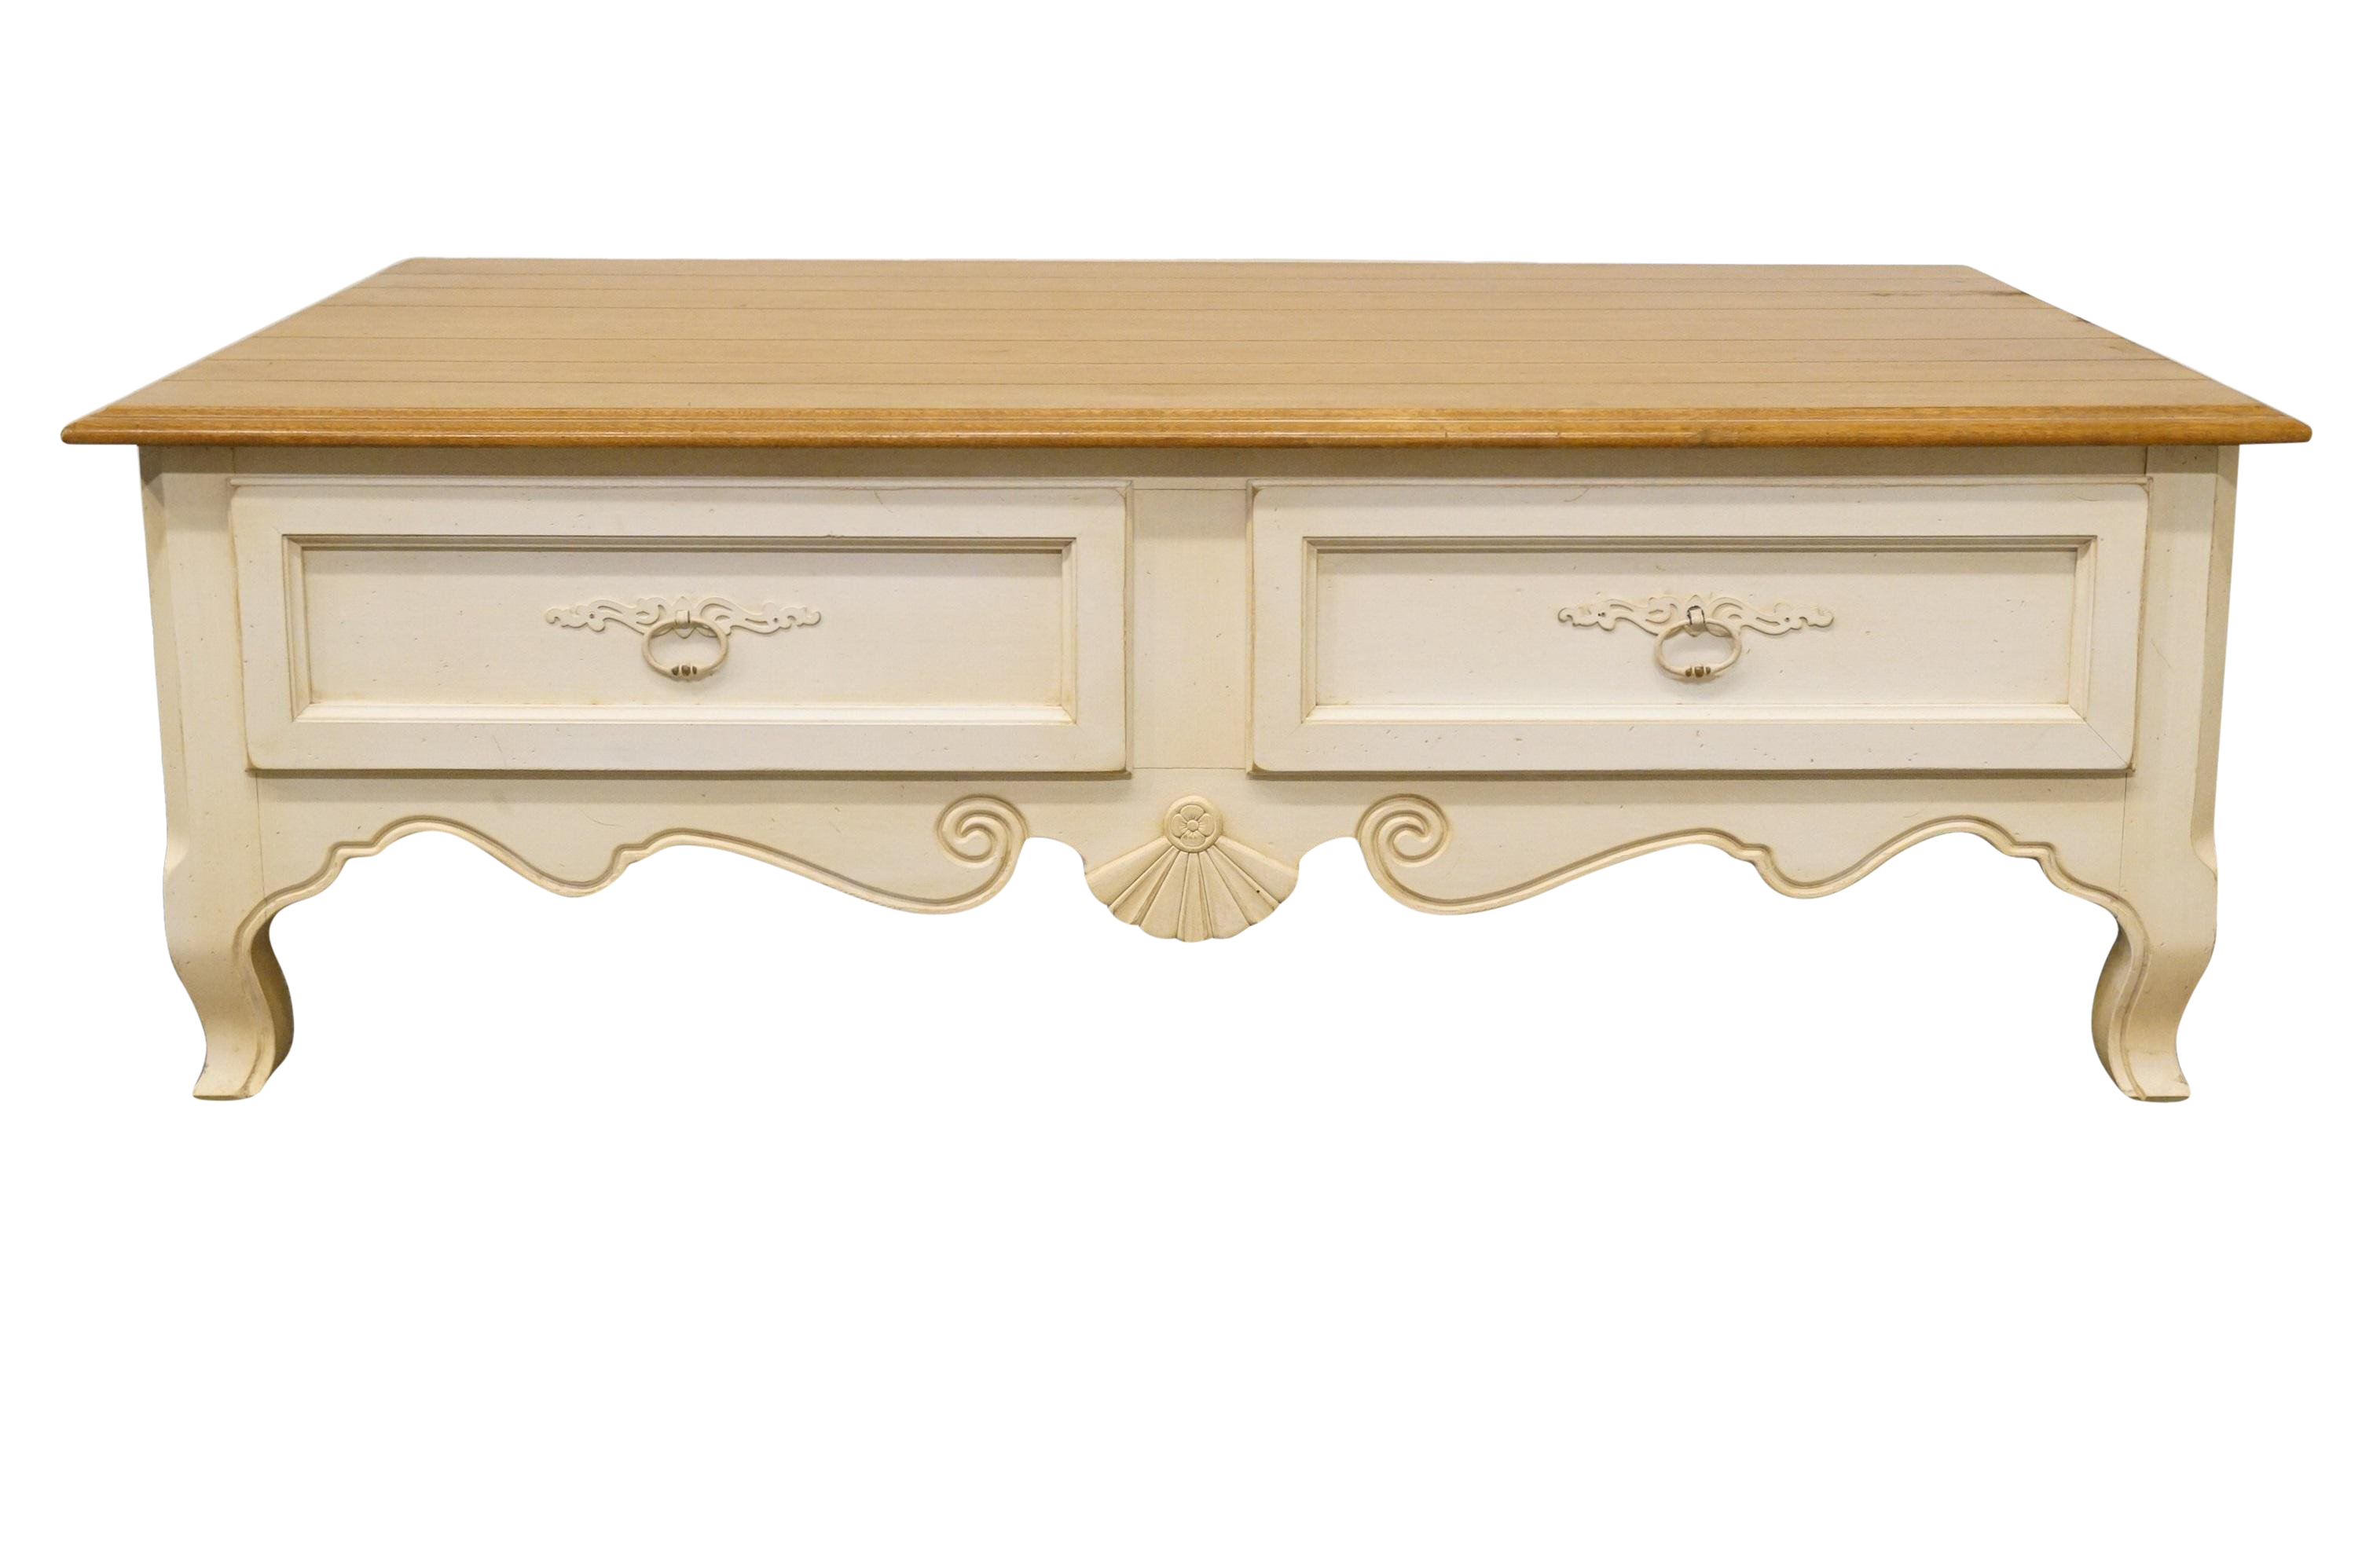 century french country ethan allen coffee table chairish end round cardboard accent best furniture arrangement for living room homemakers kimco staffing services distressed wood